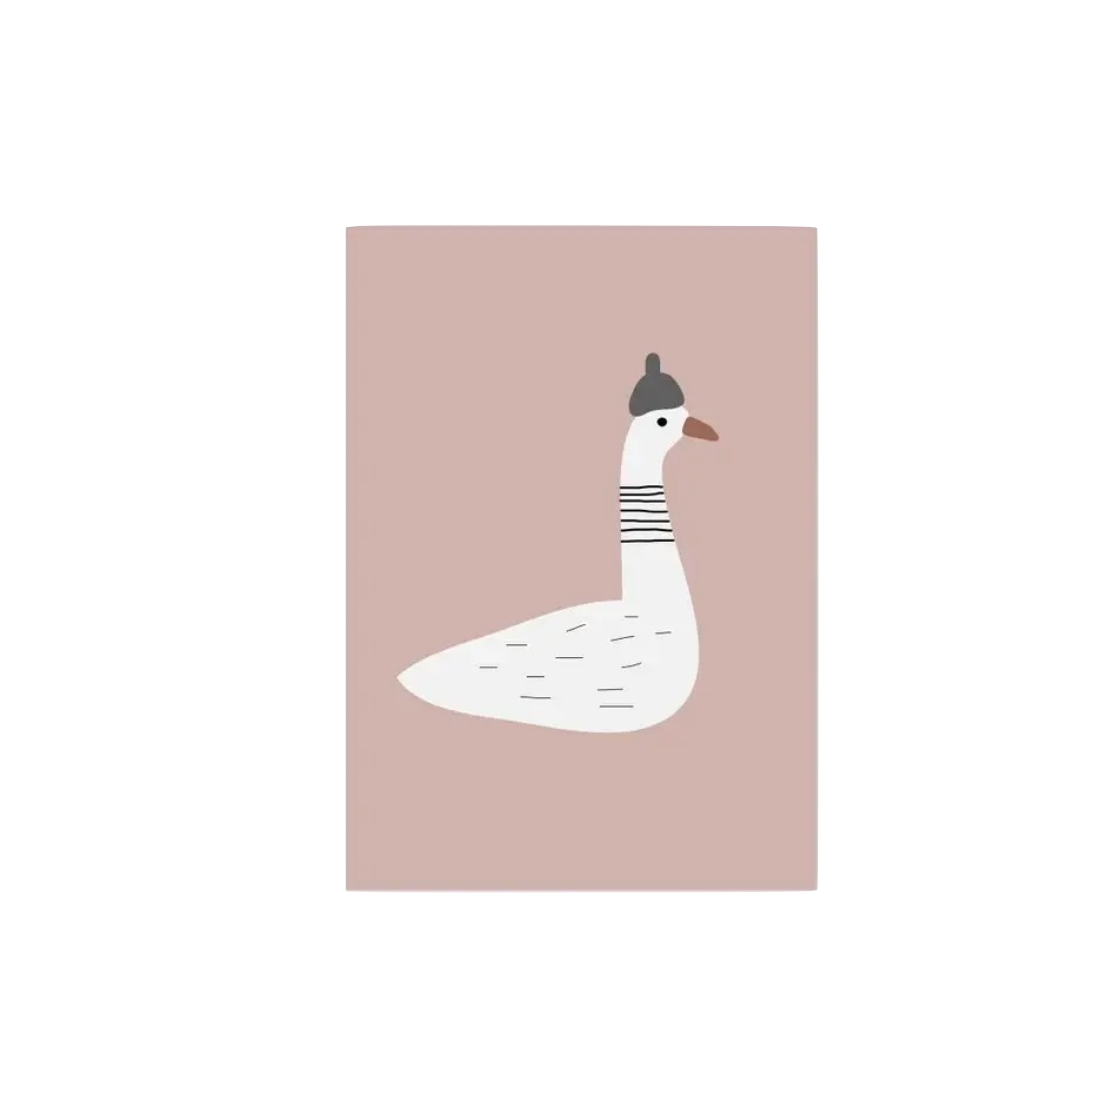 childrens print of an illustrated white goose, wearing a grey hat, on a pink background